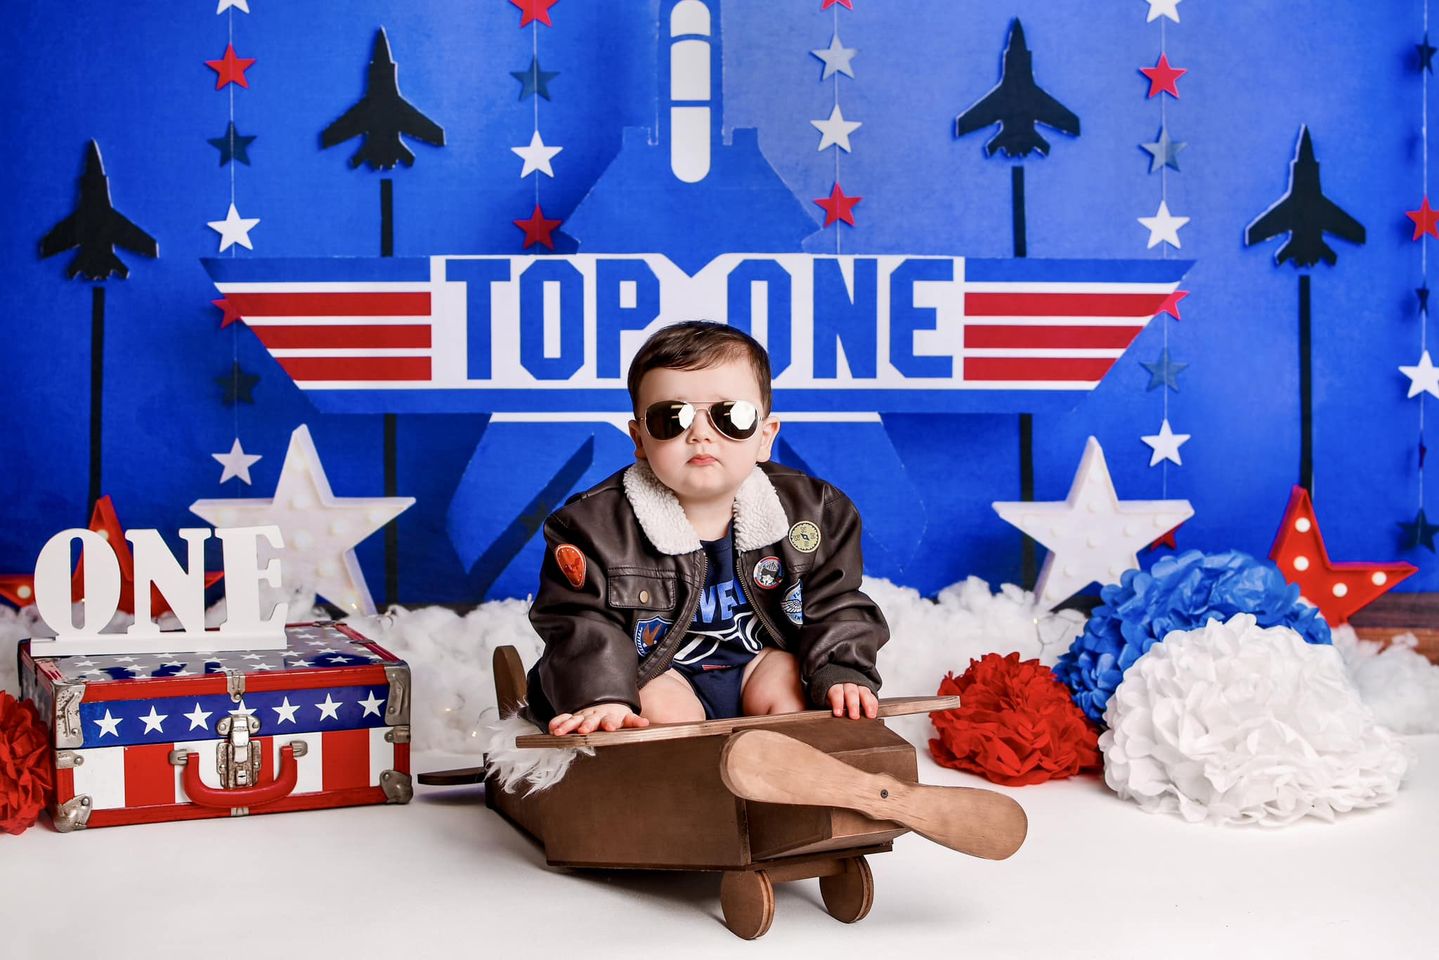 Kate Top One Airplane Rocket Backdrop Cake Smash Designed by Megan Leigh Photography